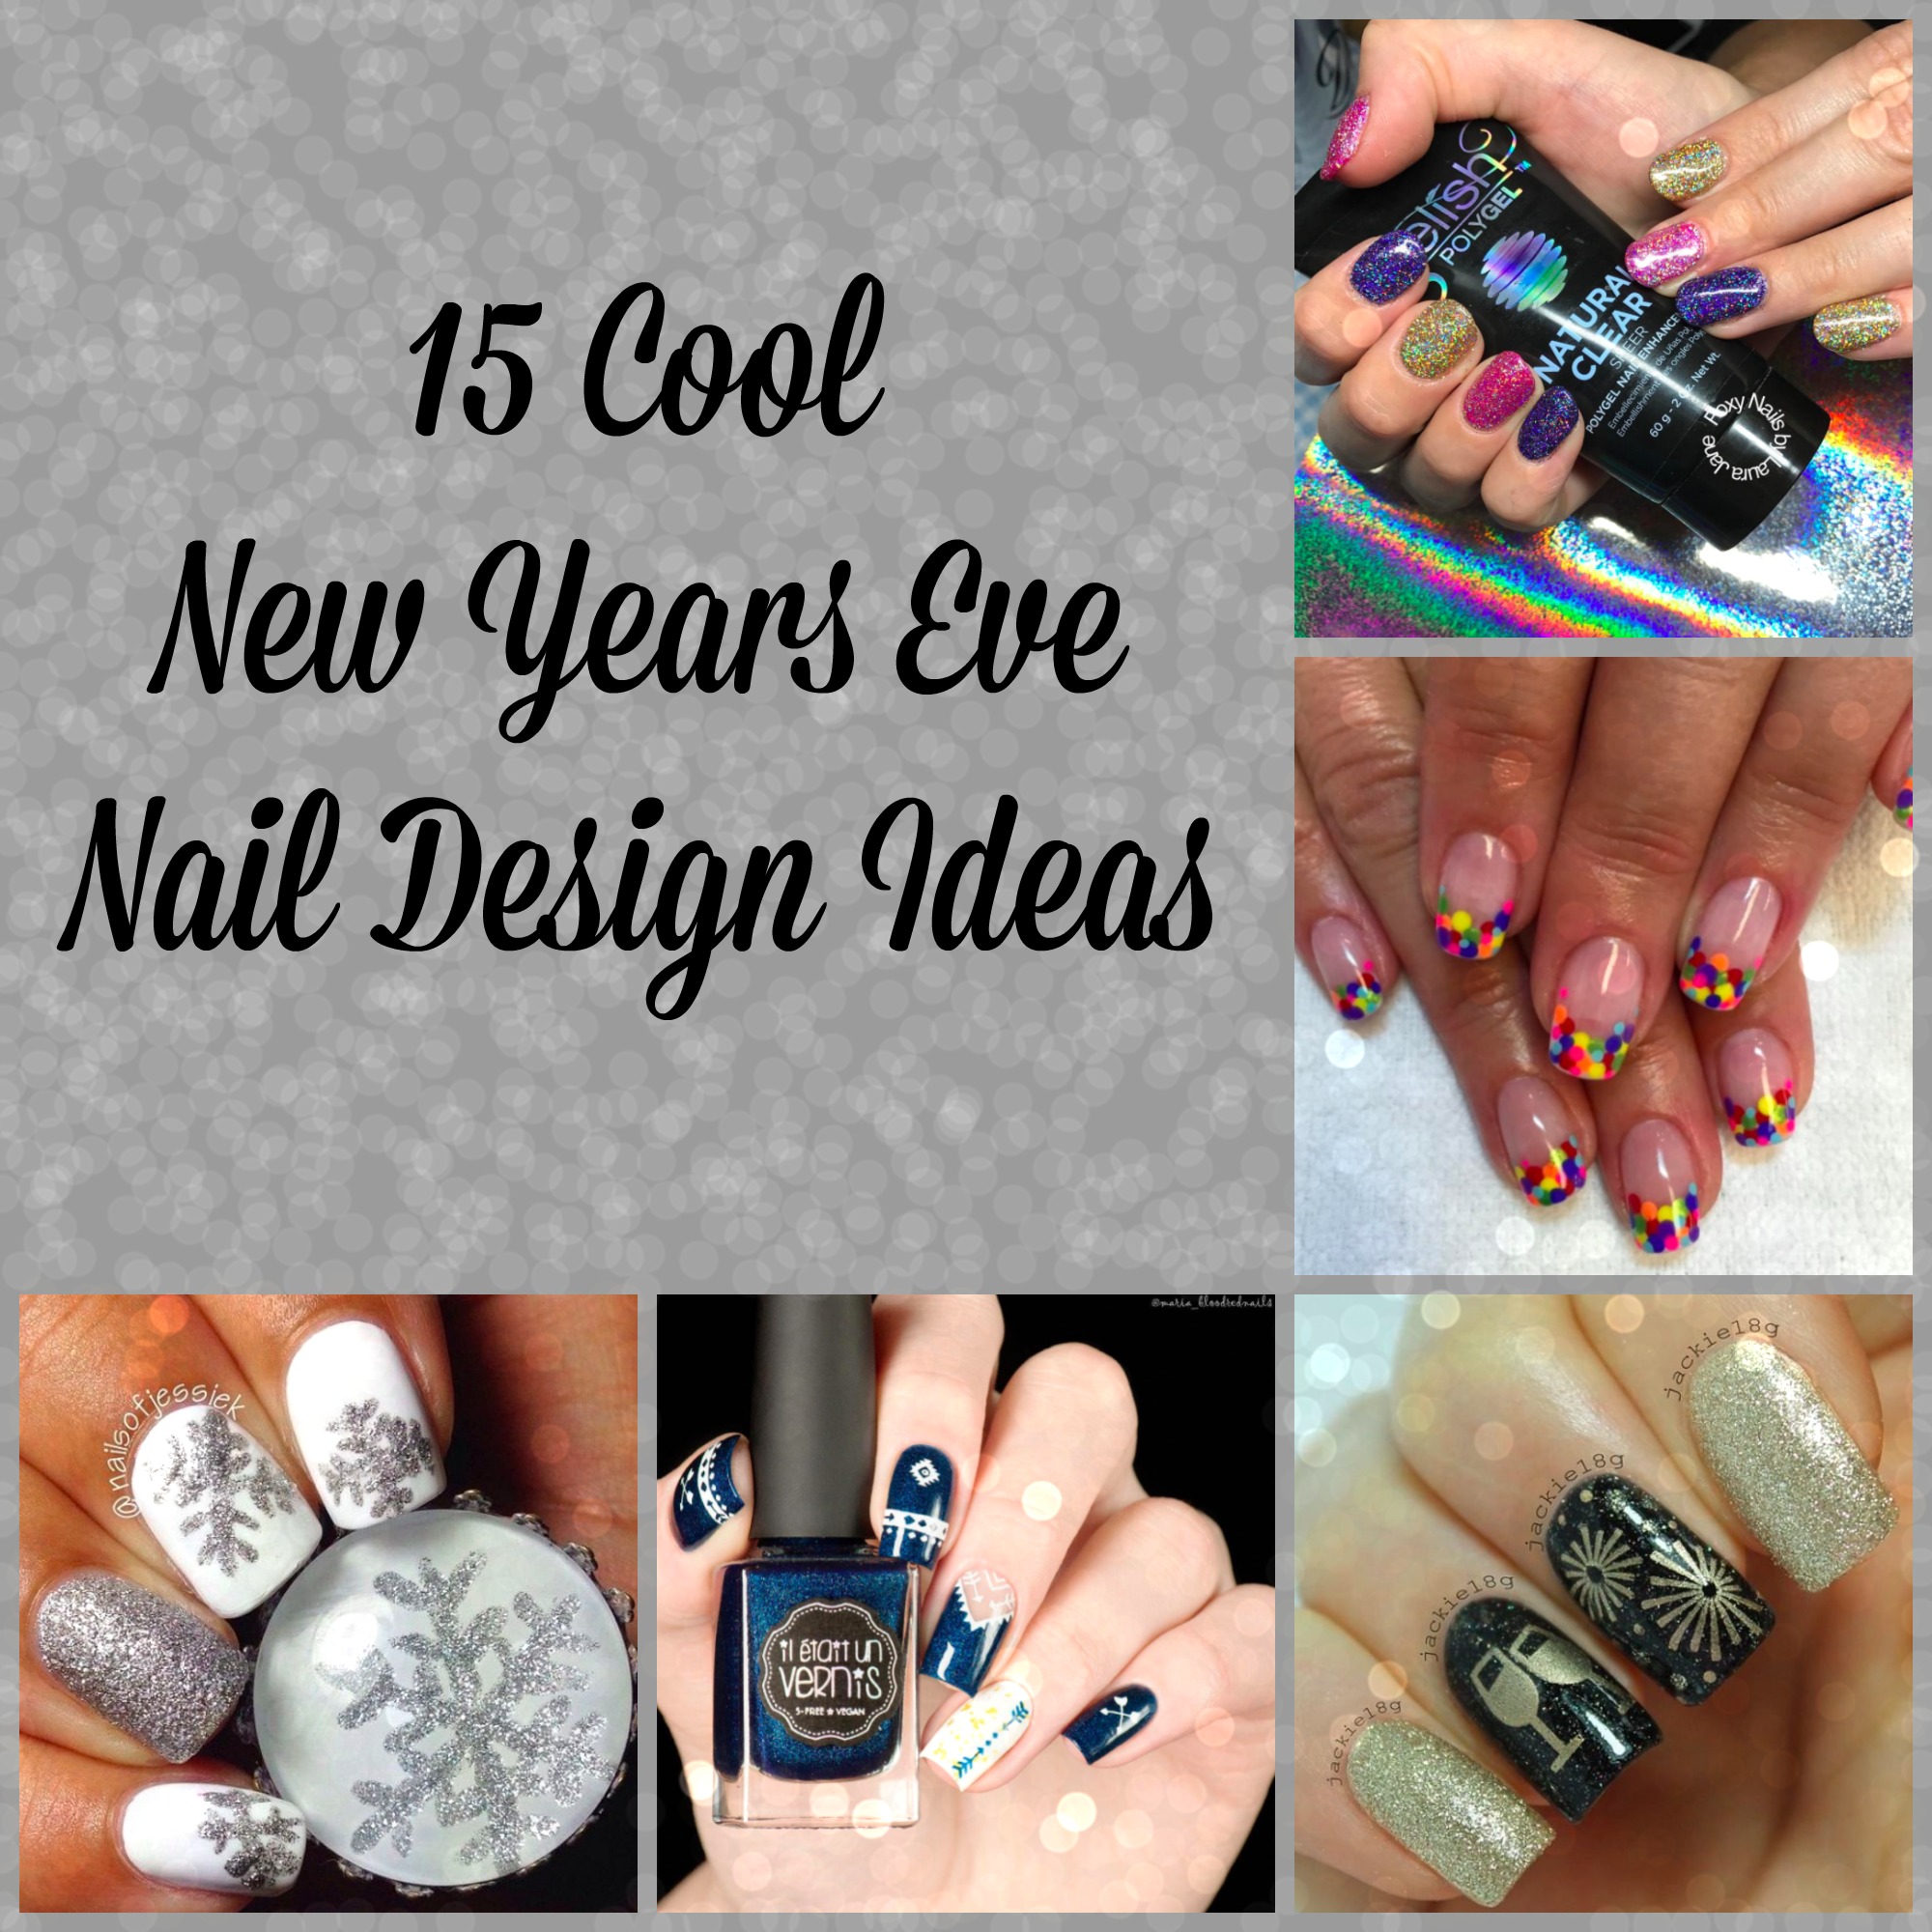 15 Cool New Years Eve Nail Design Ideas